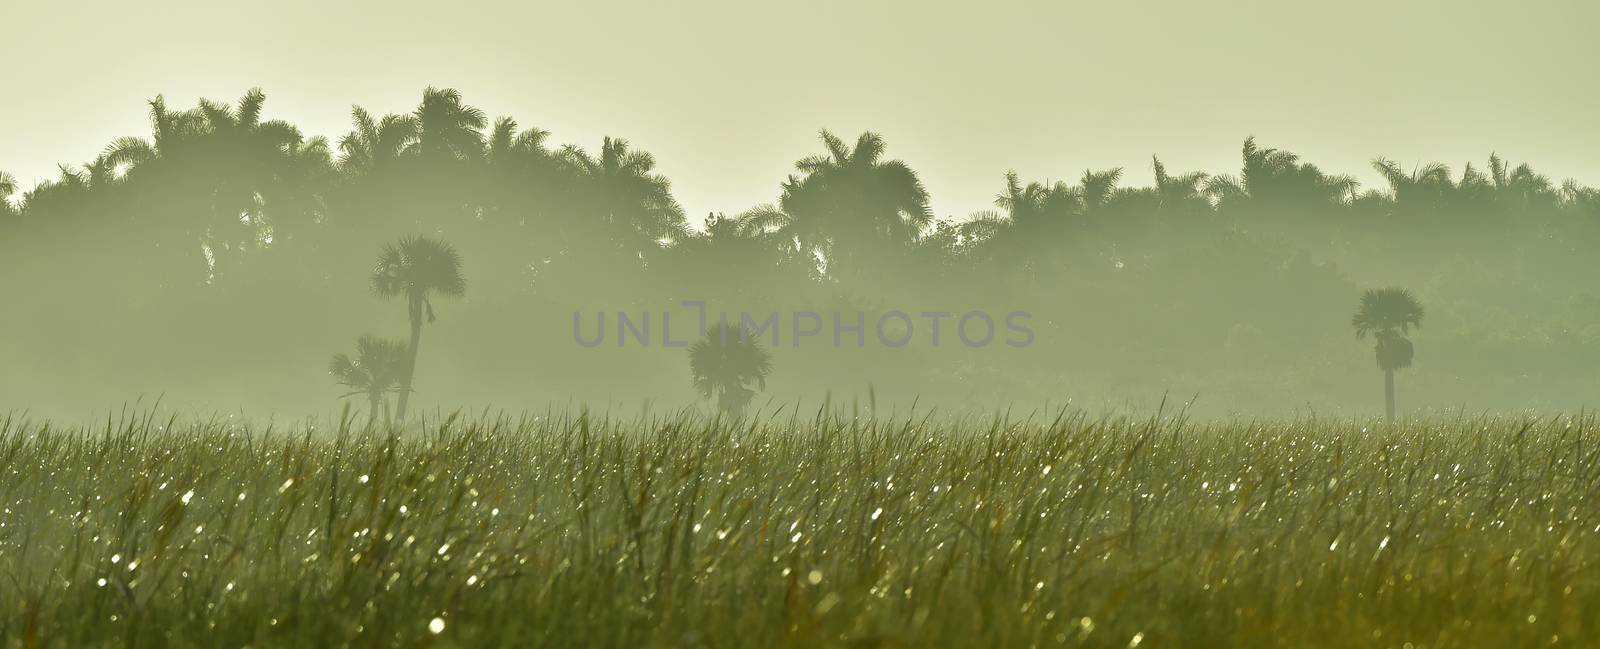 Palms and plants in tropic on sunrise. Zapata. Cuba